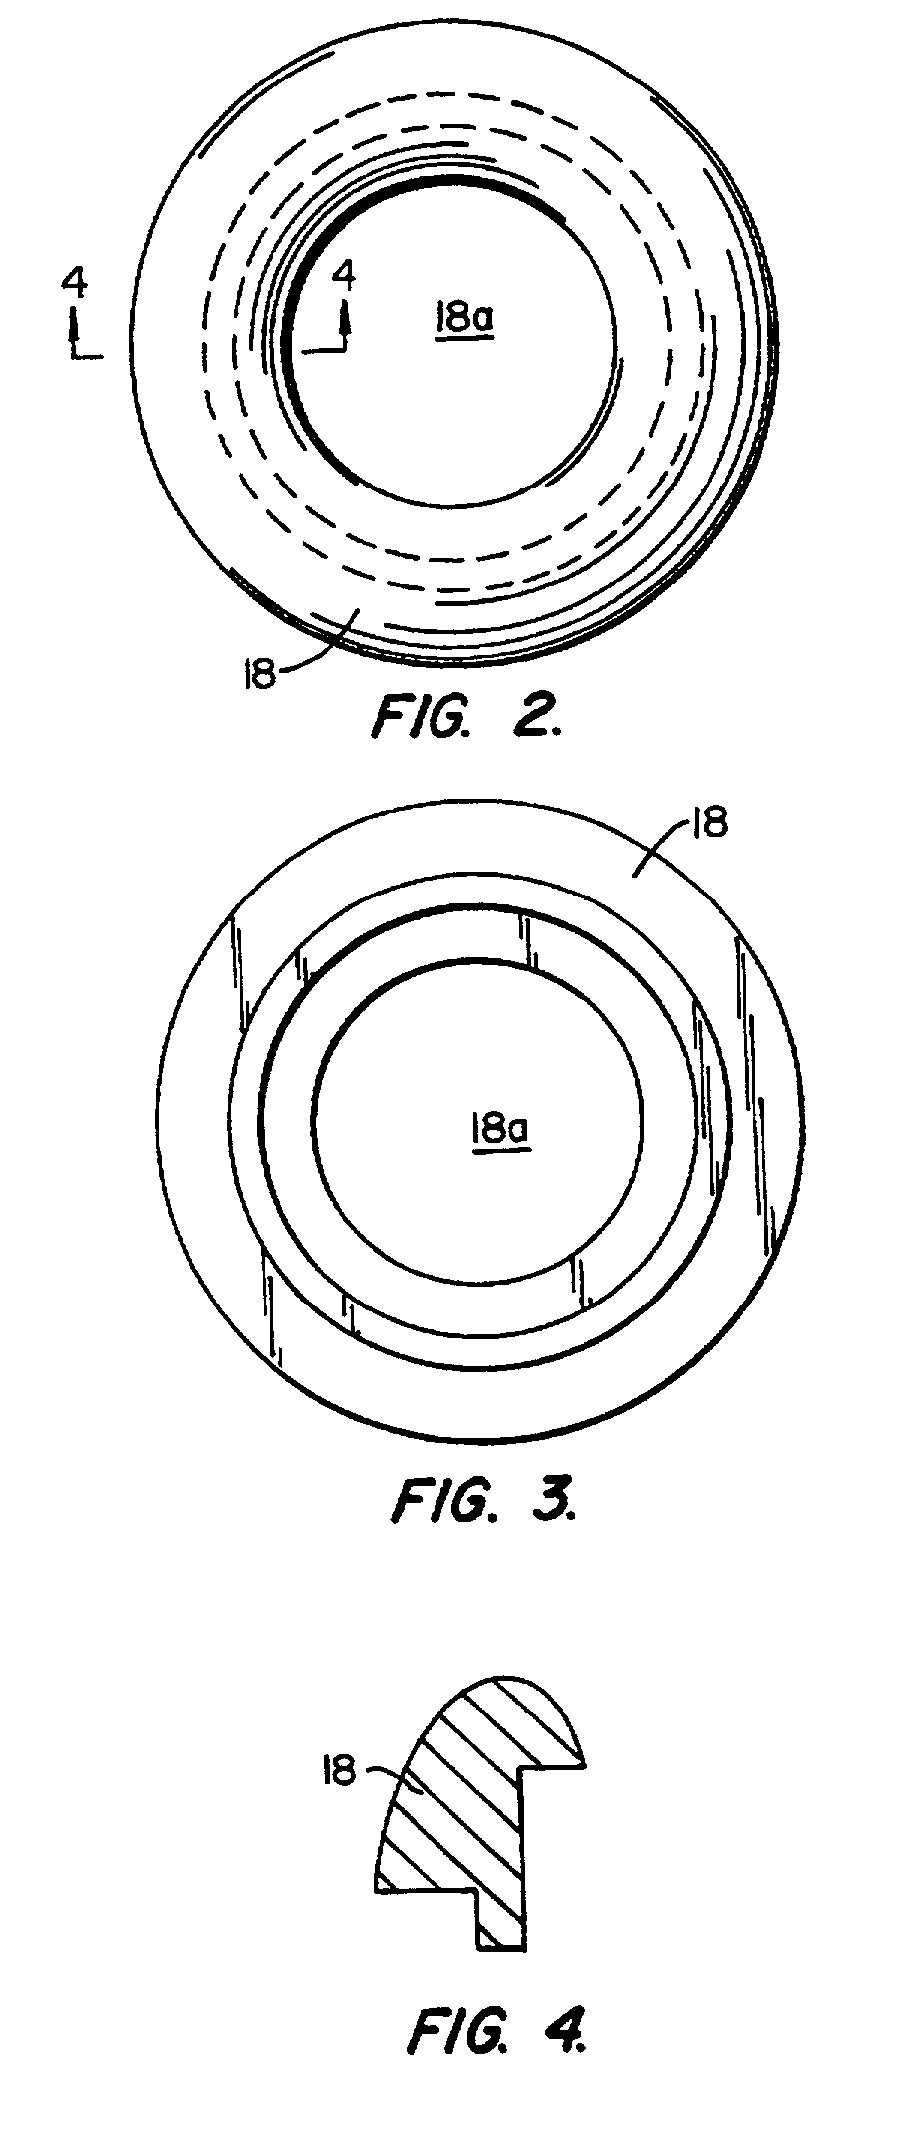 Erosion-resistant components for plasma process chambers